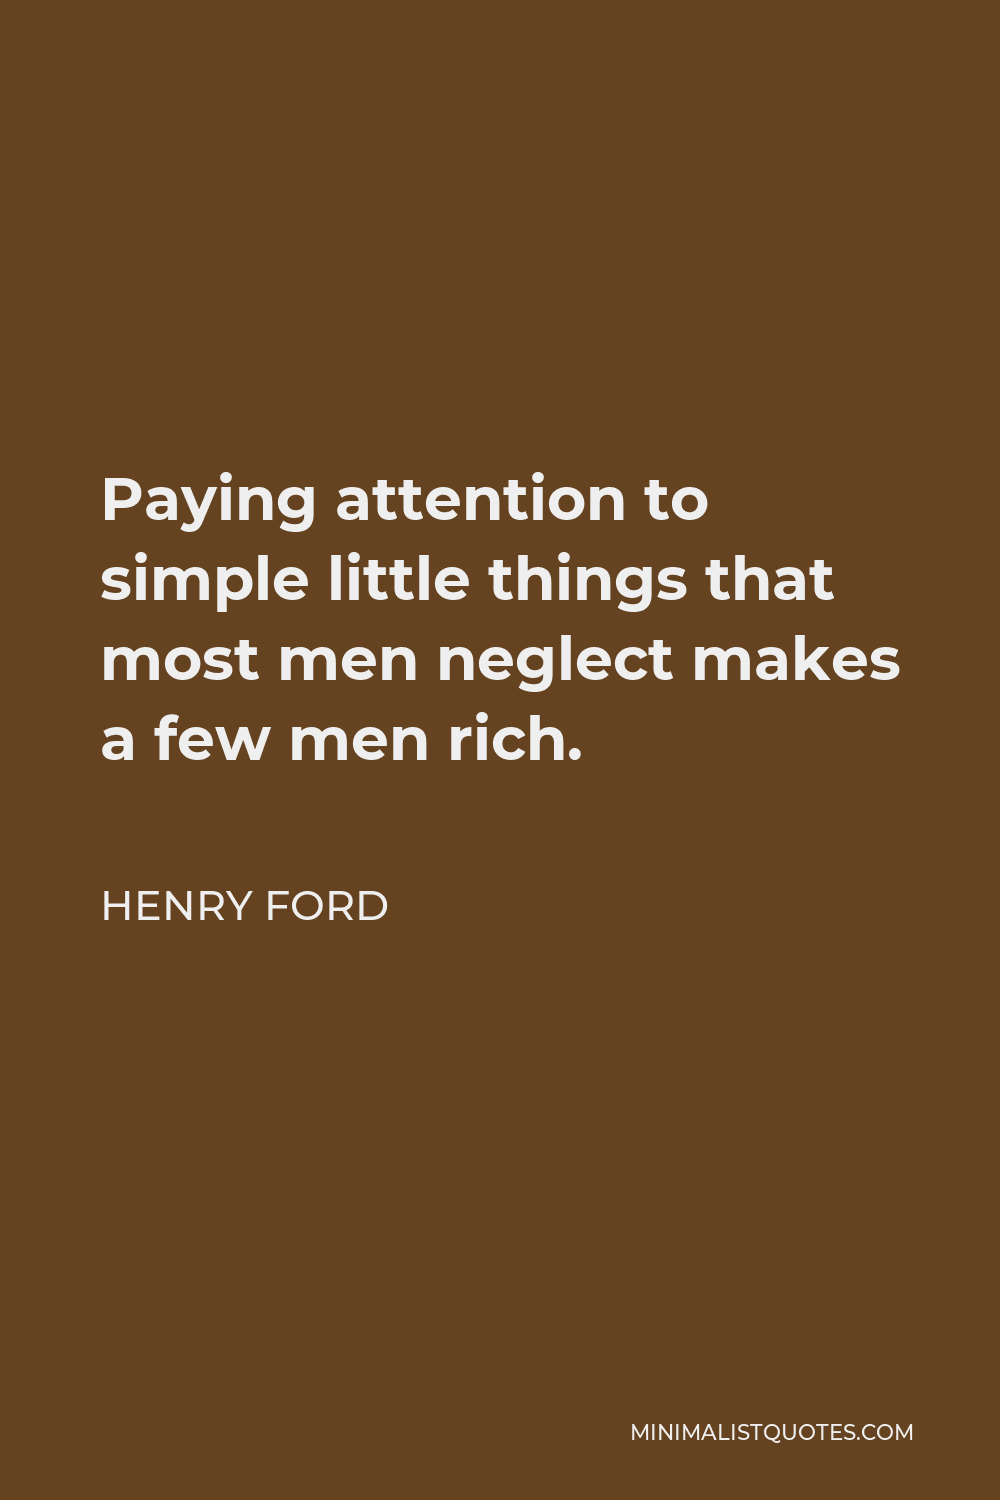 Henry Ford Quote - Paying attention to simple little things that most men neglect makes a few men rich.